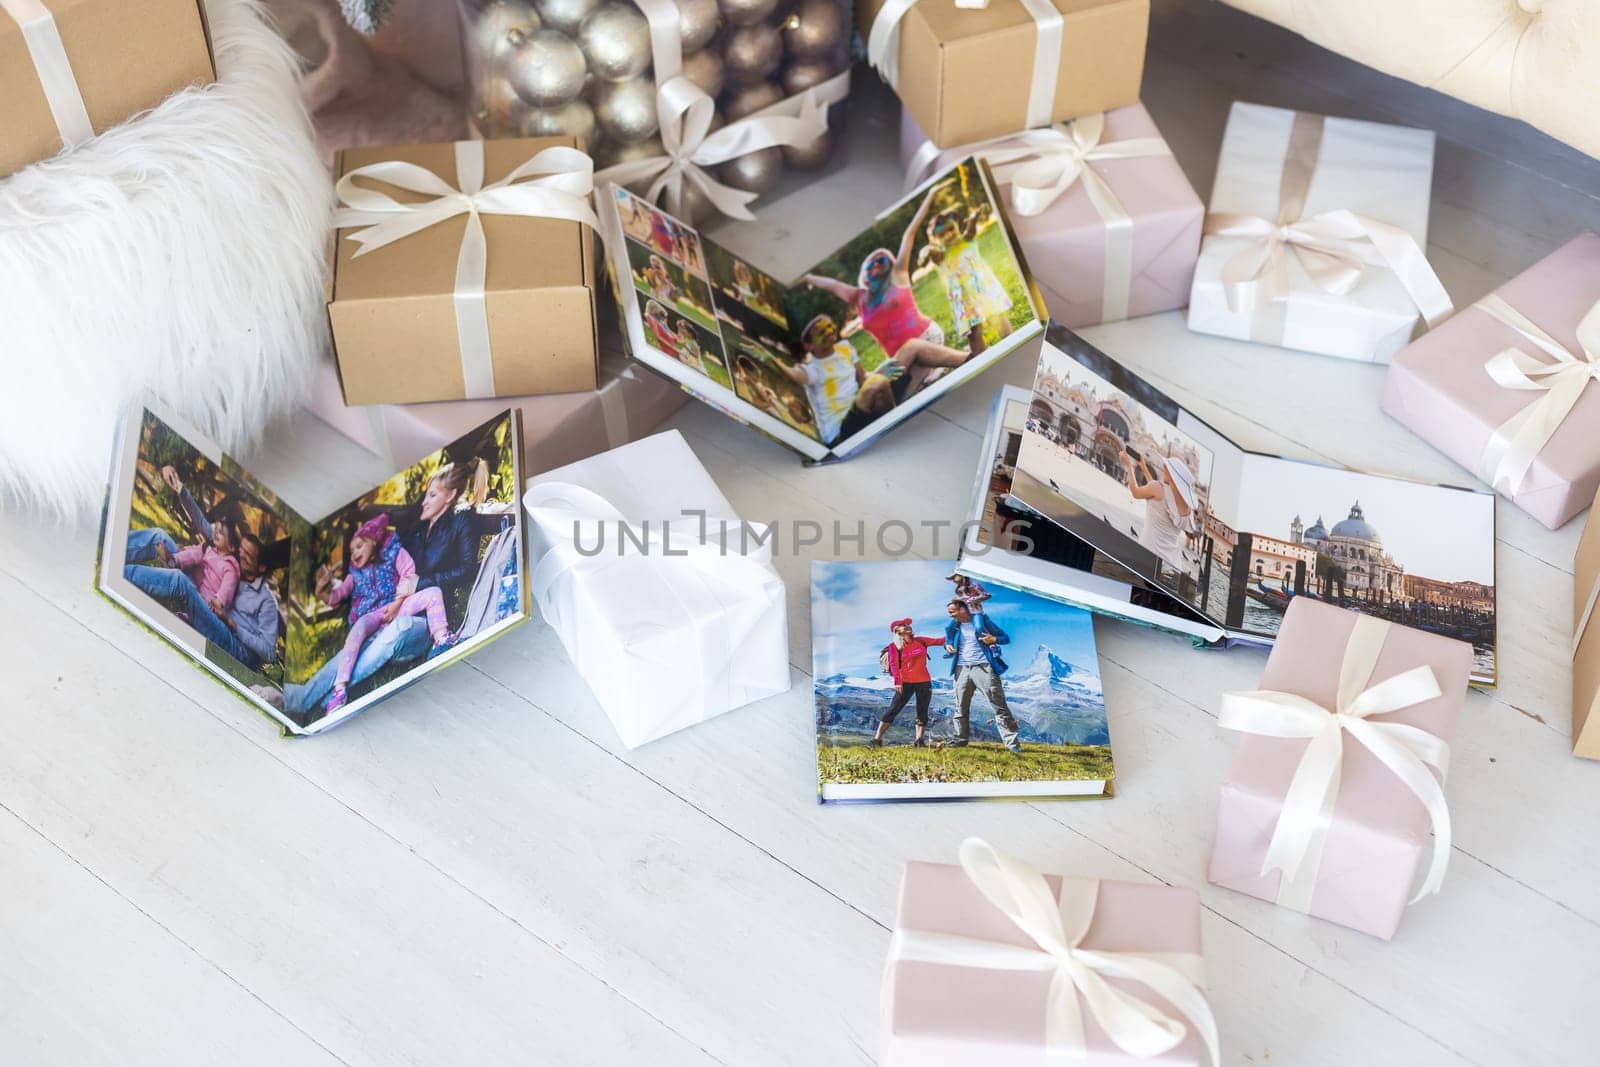 a Photobook of family.Photobook is gift. photo album next to gifts.